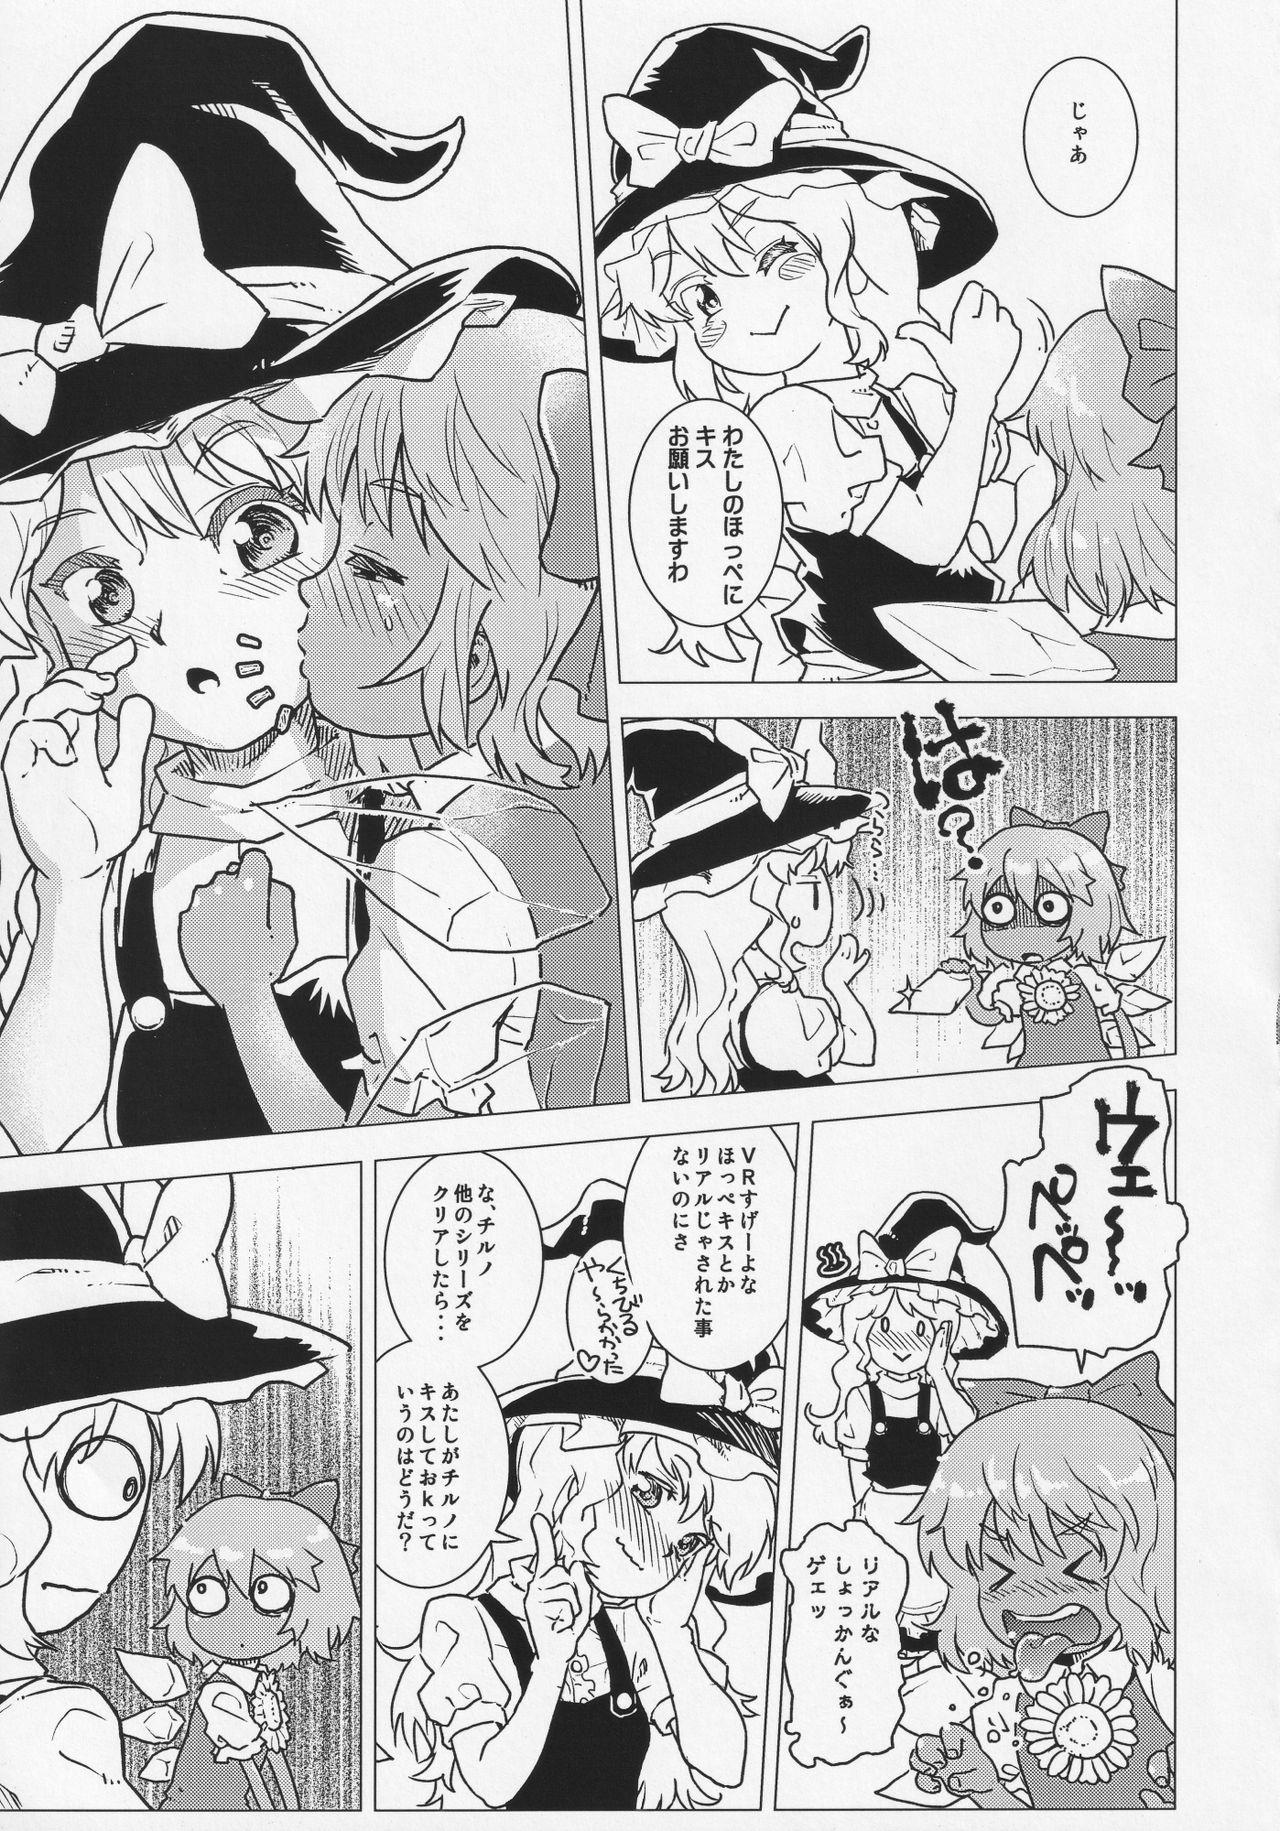 Indonesian Ready Player Nine - Touhou project Huge - Page 8